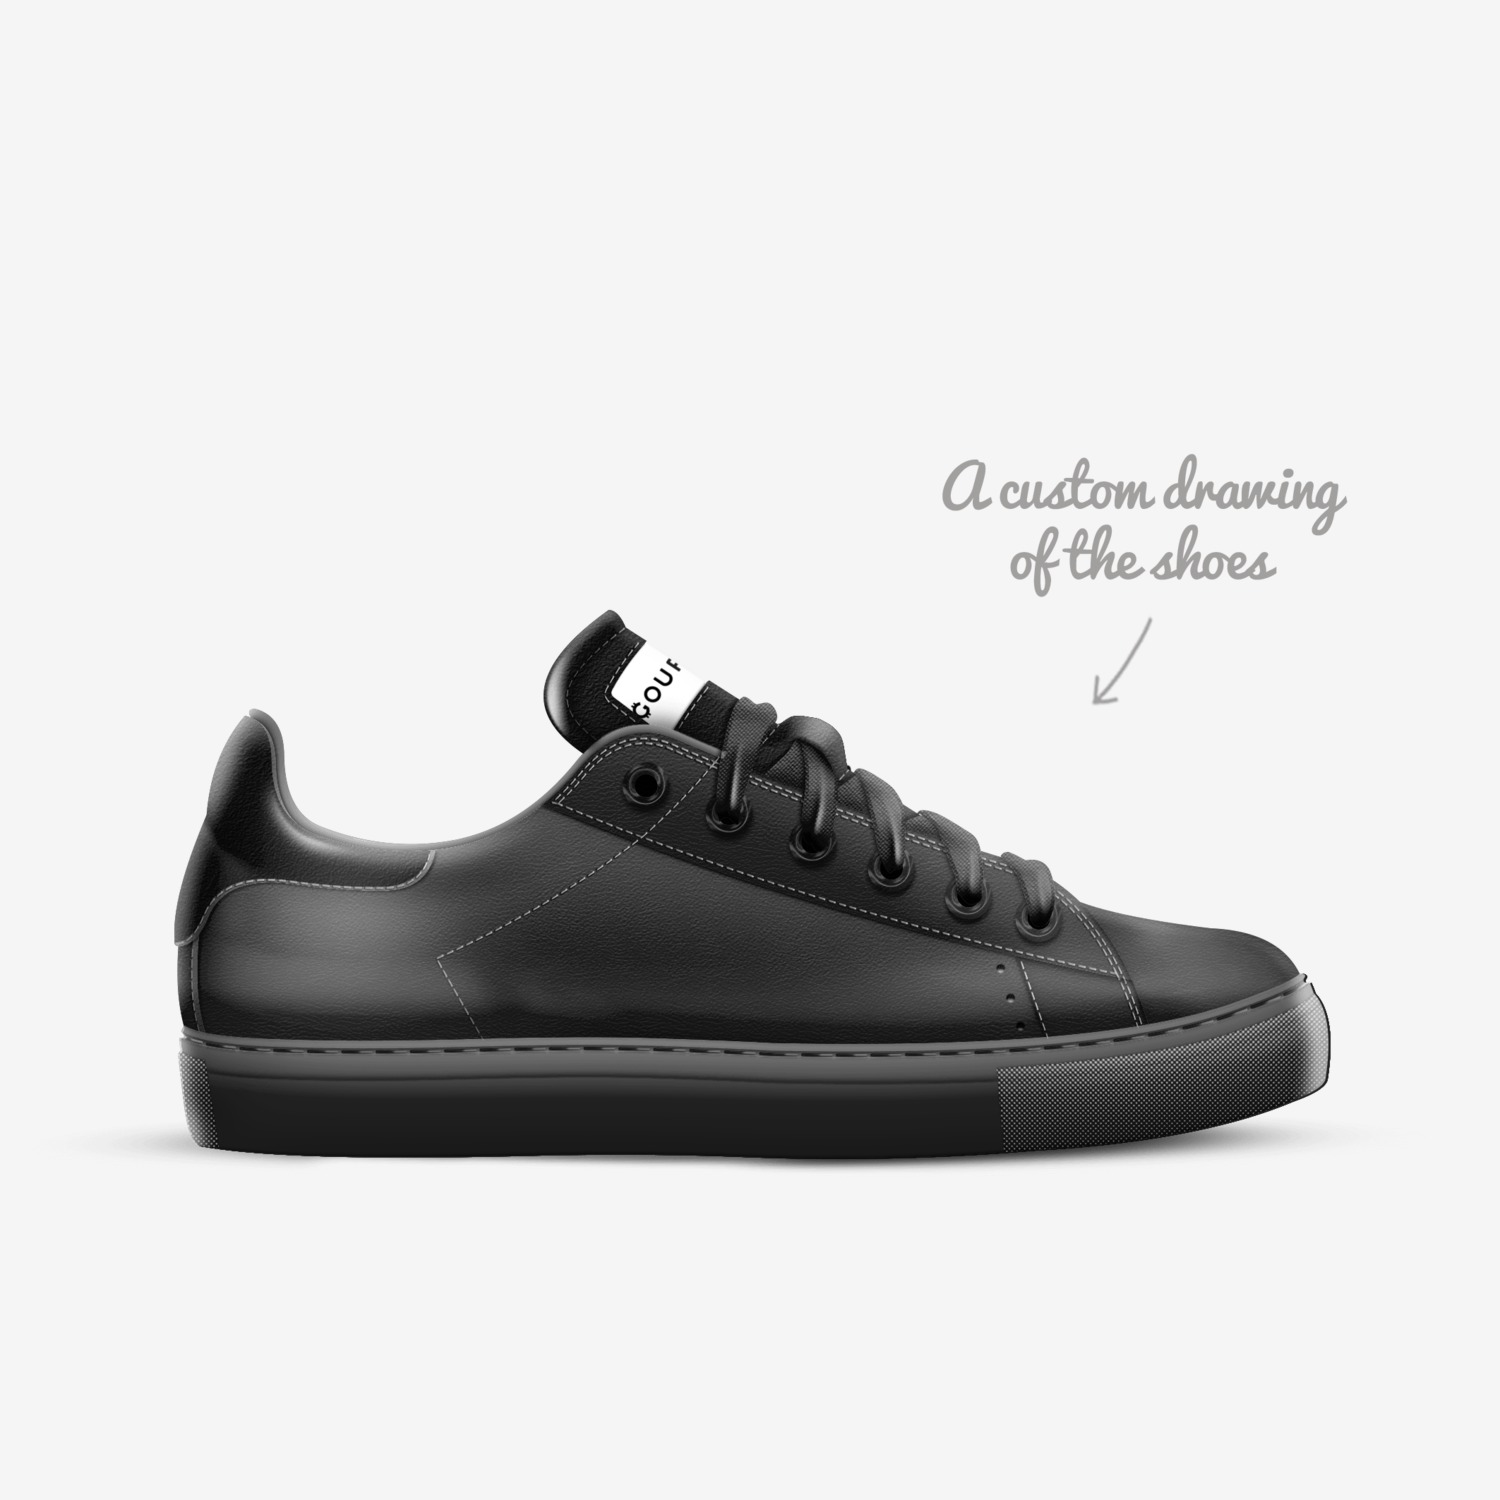 Gourmet | A Custom Shoe concept by Stan